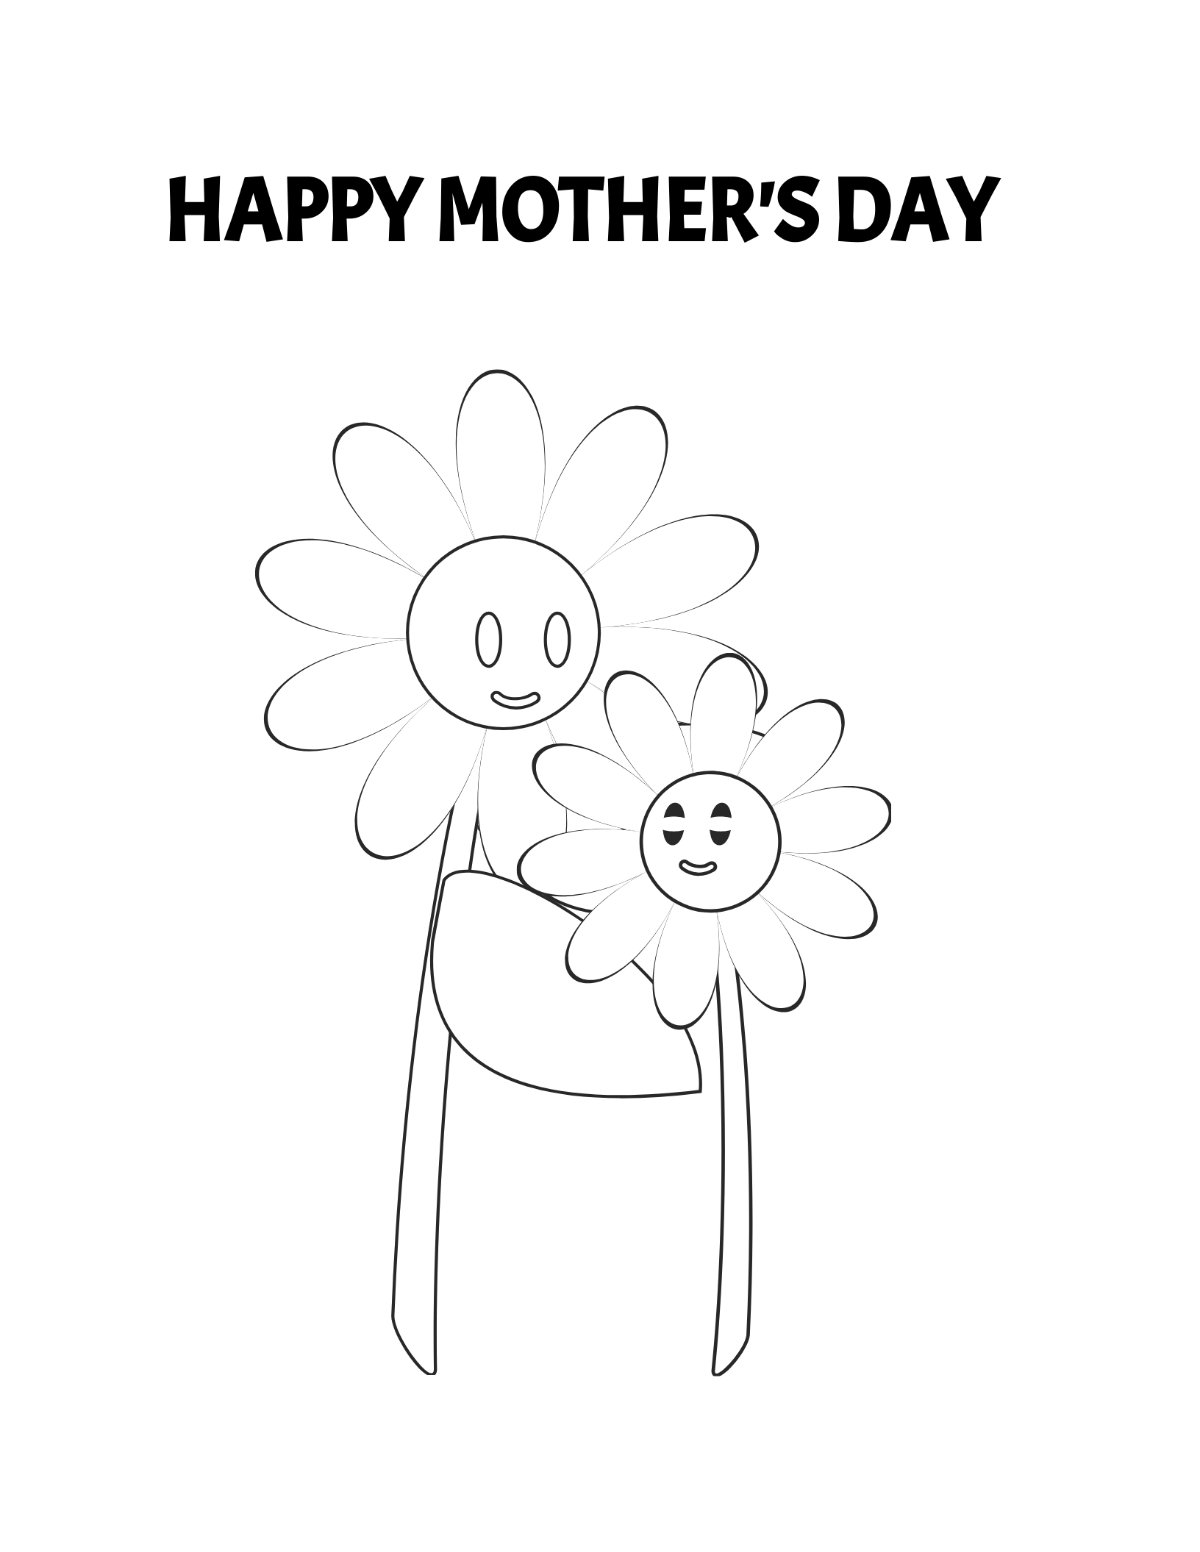 Preschool Mother's Day Coloring Page Template